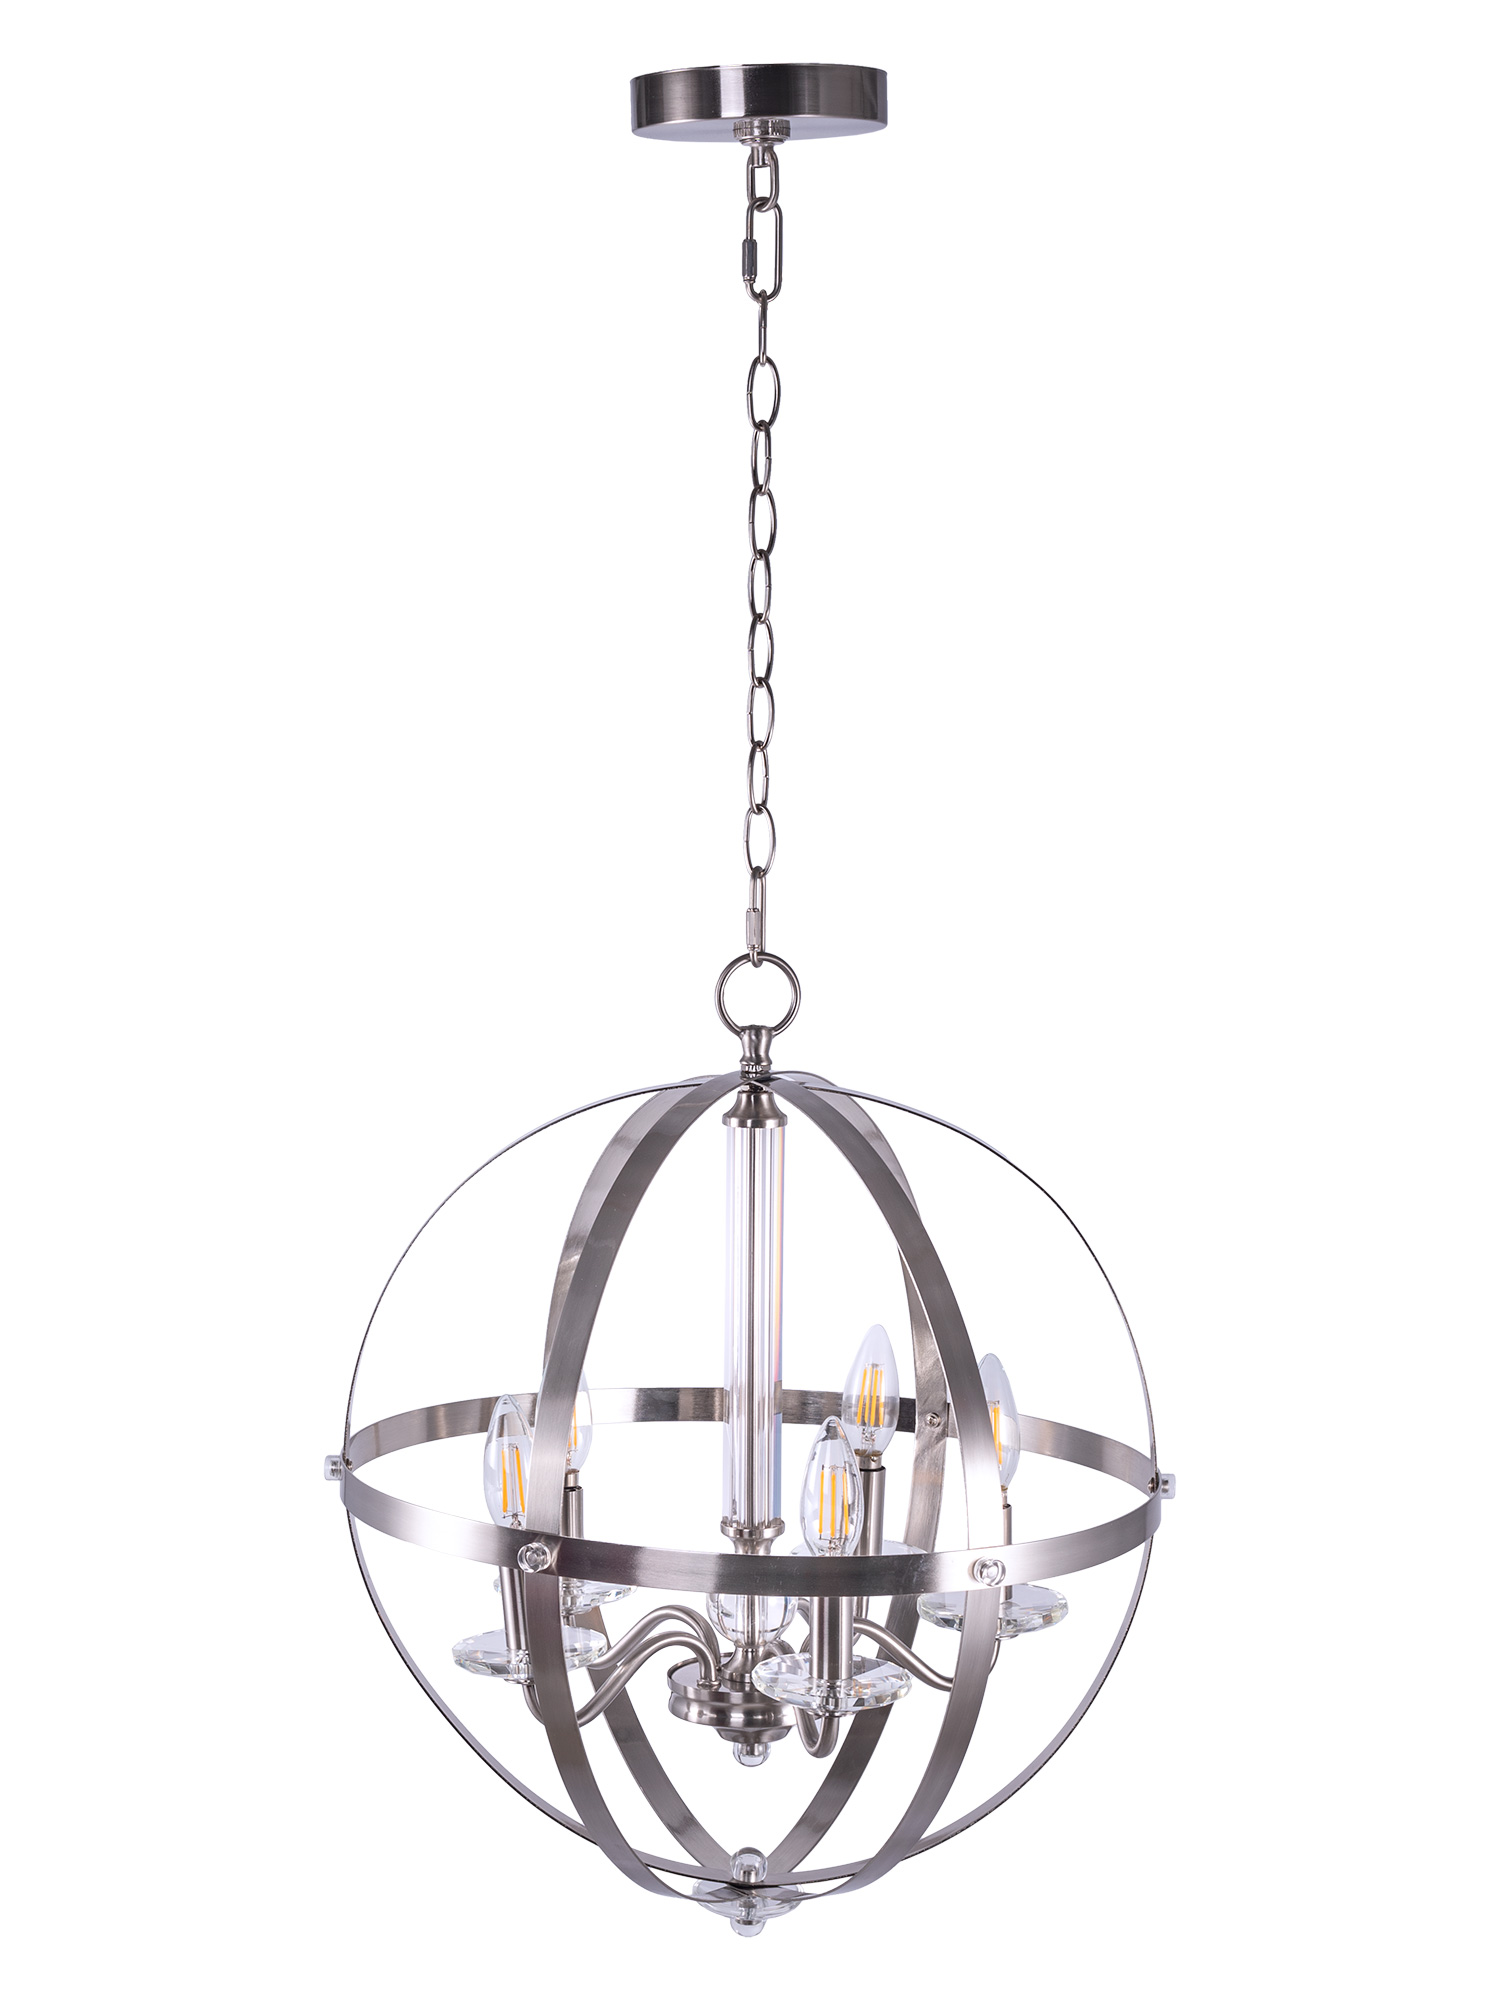 USA-Direct-5-Light-Candle-Style-Globe-Chandelier-Industrial-Rustic-Indoor-Pendant-Light-Without-Bulb-1877125-3